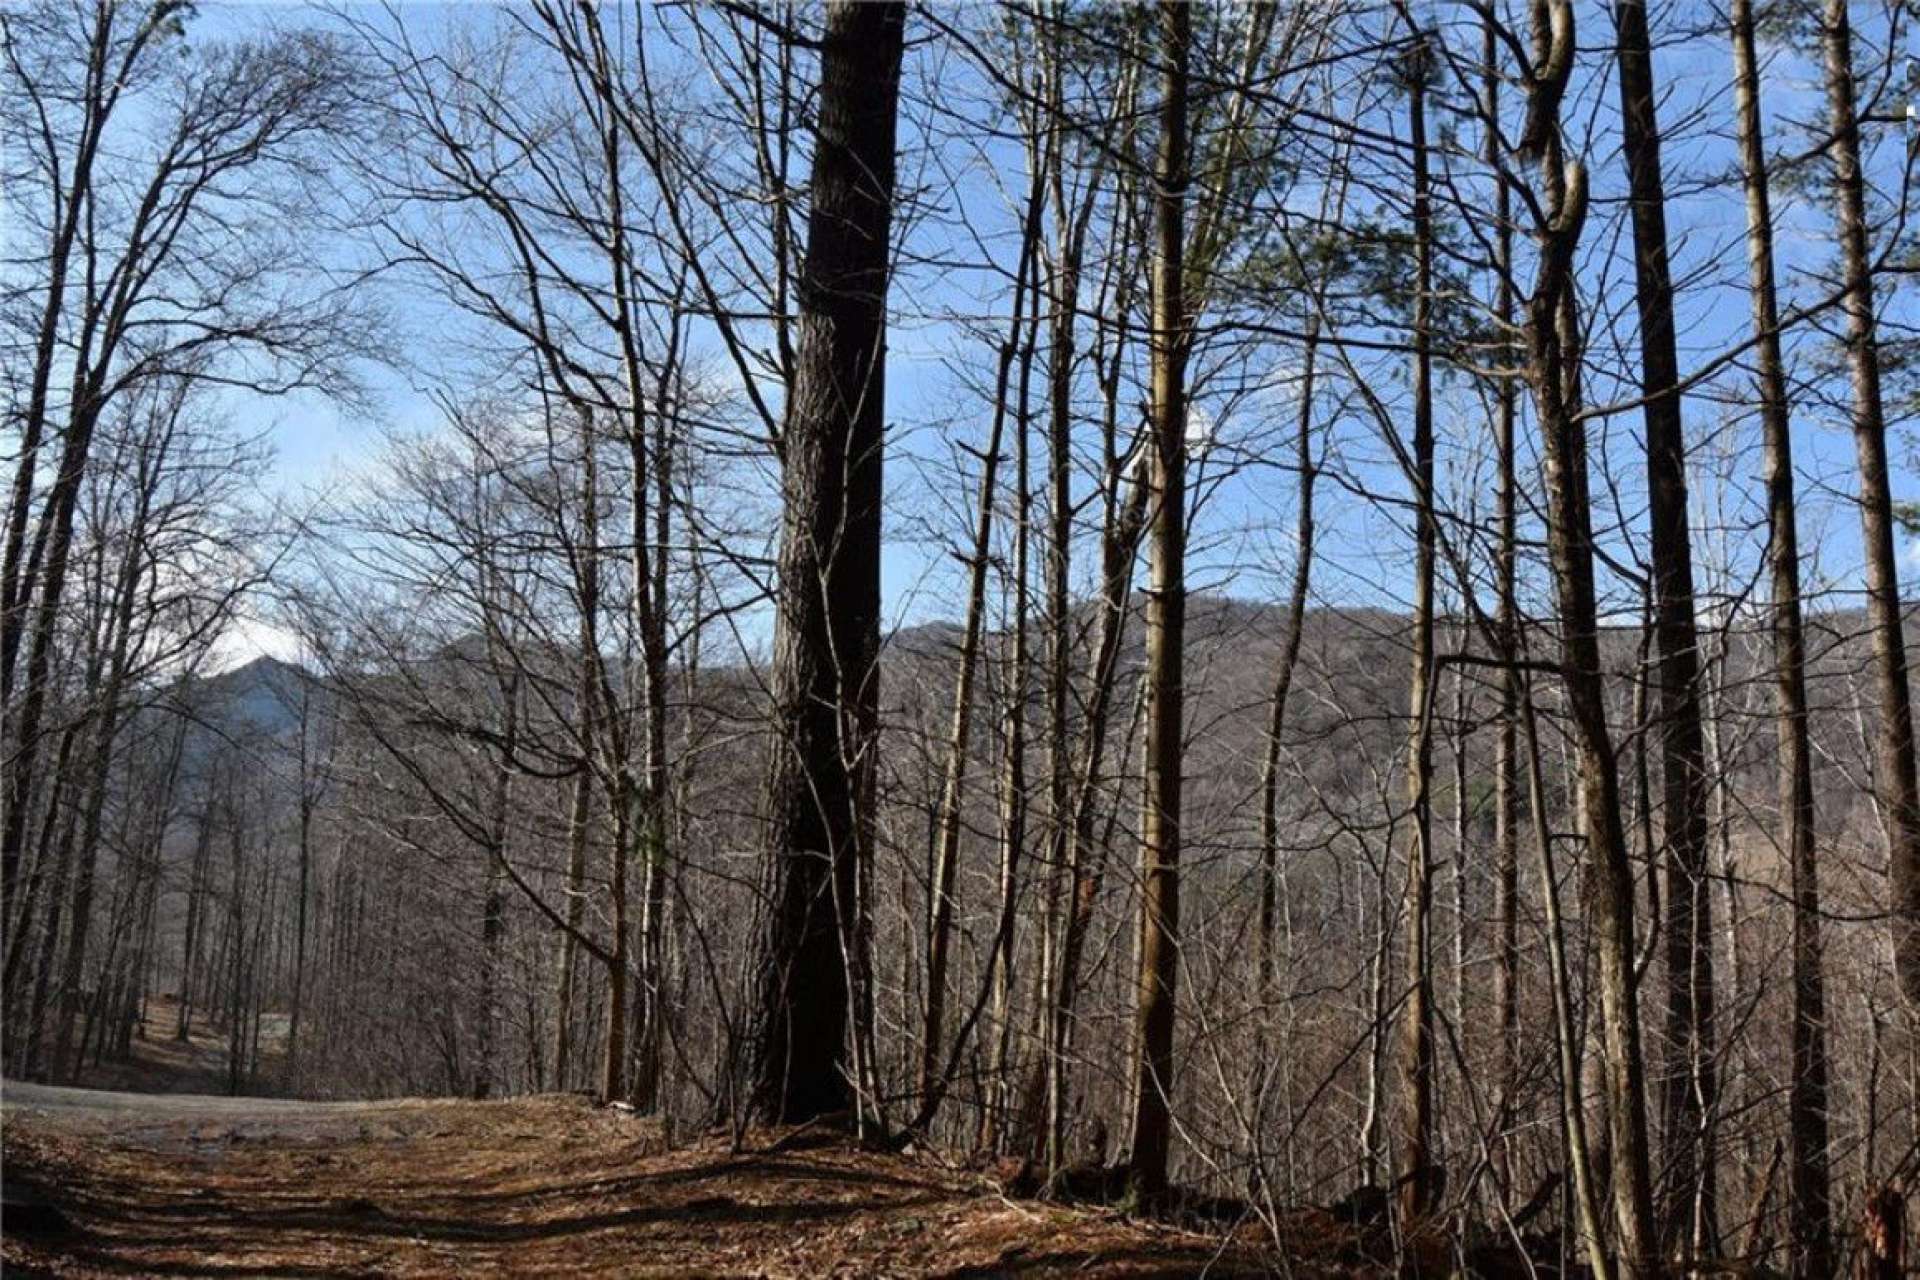 Offered at only $100,000, this 10.70 acre tract of mountain land is ideal for those looking for a secluded place to construct their mountain cabin or home. The location is both private and only a 15 minute drive into West Jefferson to enjoy a day of shopping, restaurants, and the many unique shops. Call today for more information on listing K219.